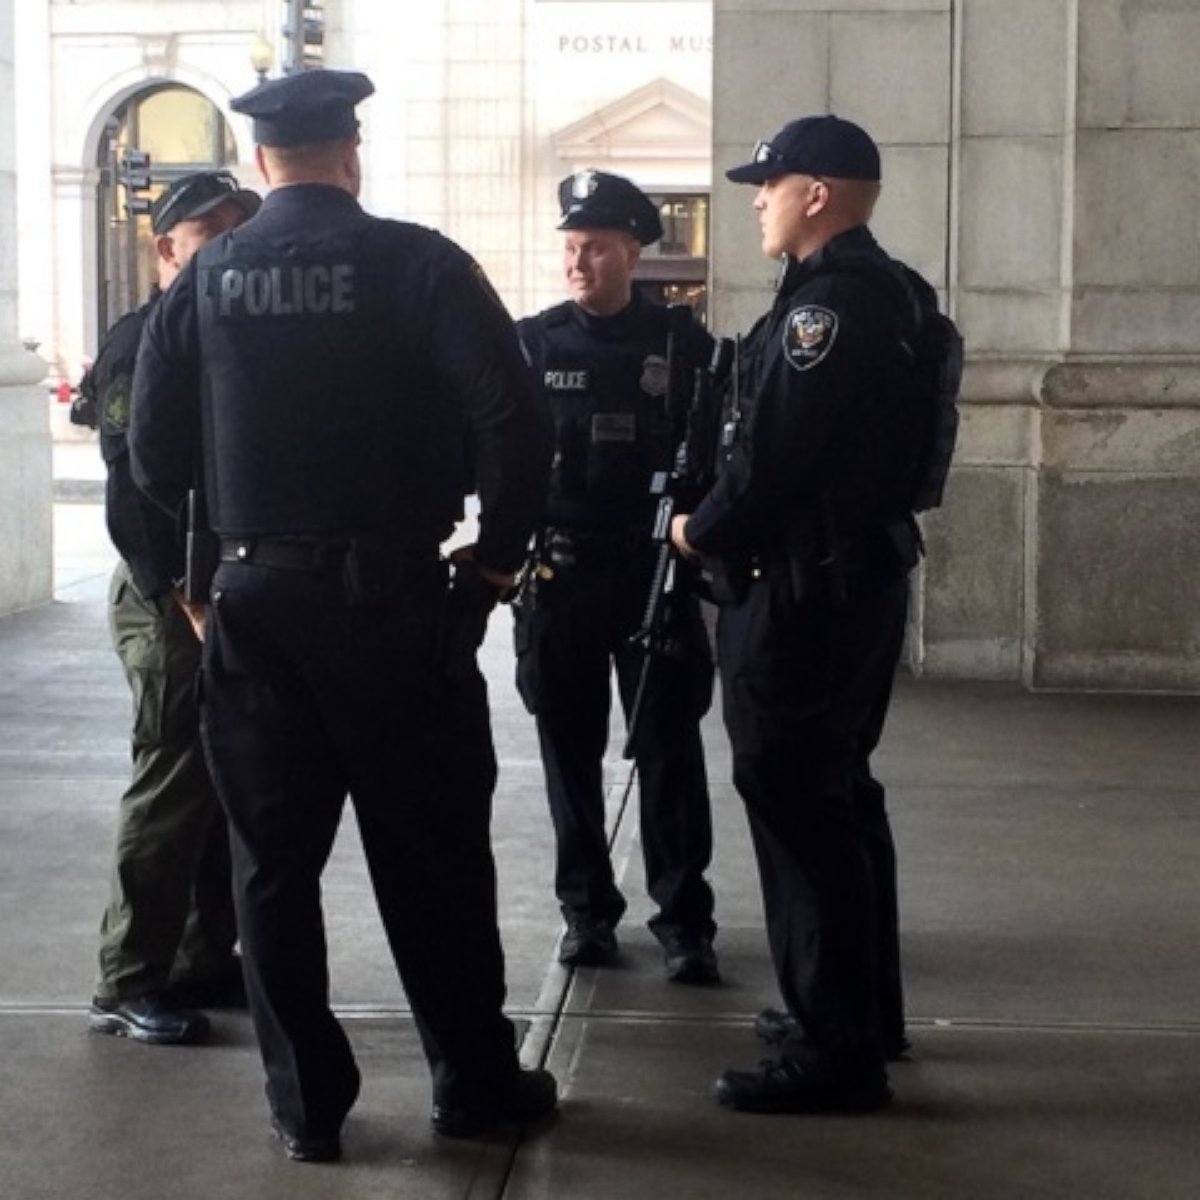 PHOTO: Officers were on guard at Union Station in Washington, D.C., Nov. 16, 2015.